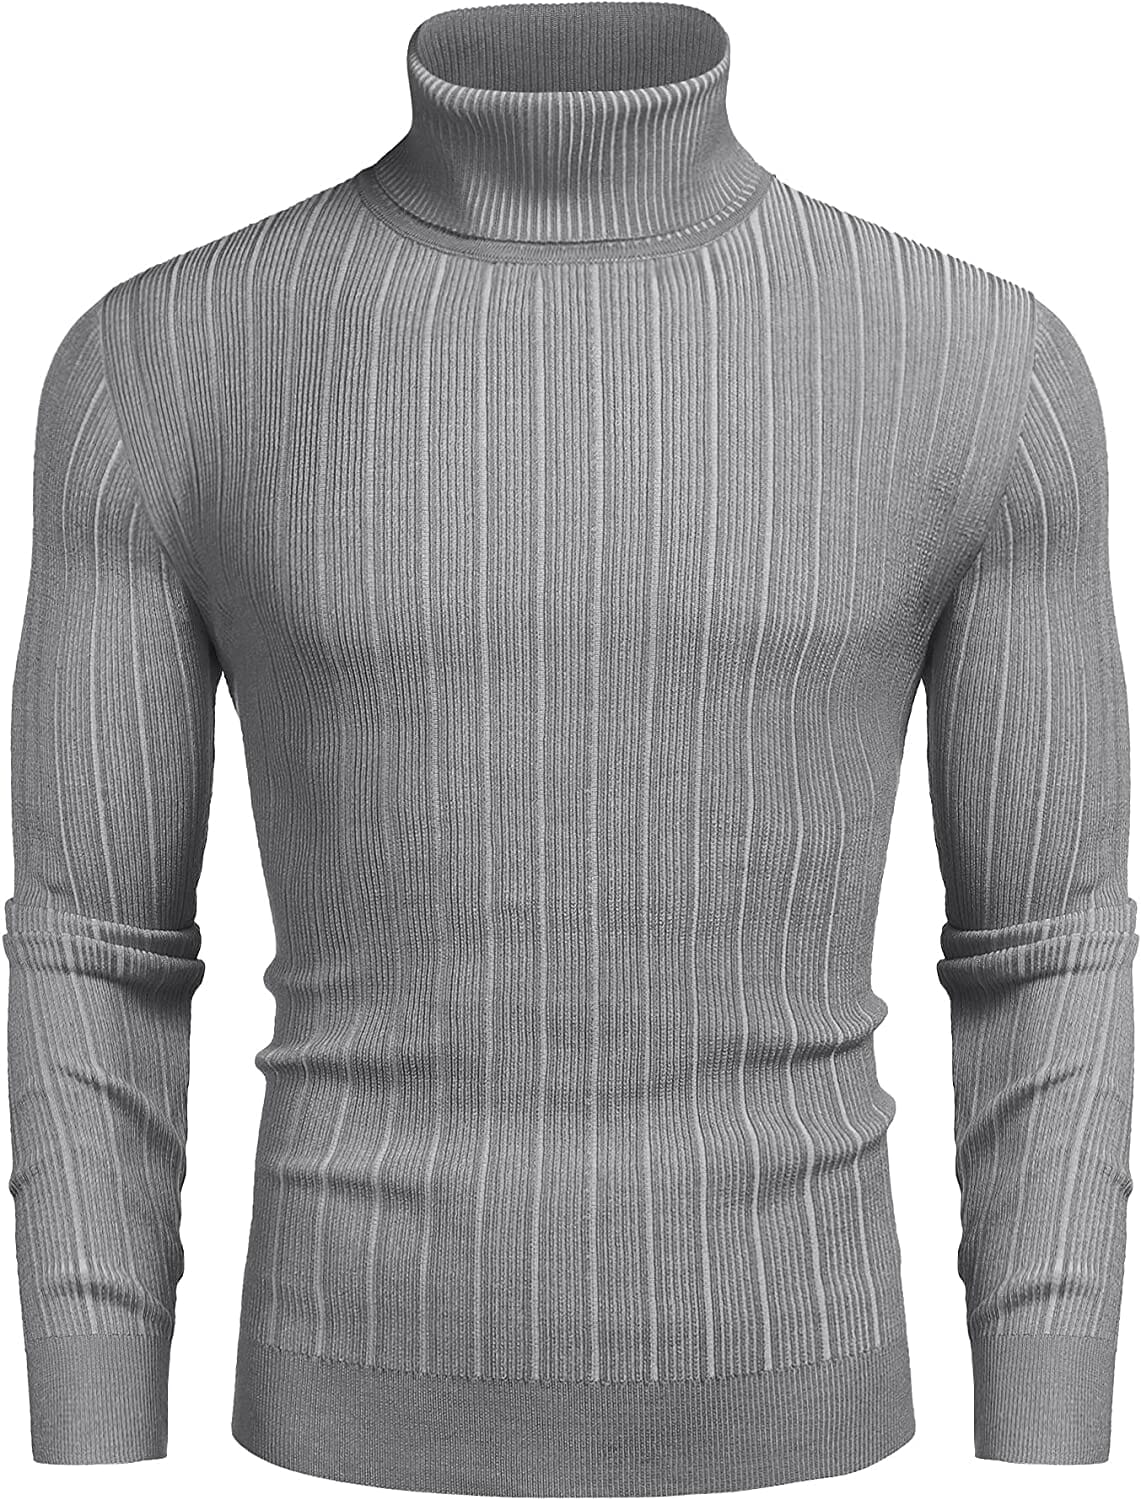 Slim Fit Knitted High Neck Pullover Sweaters (US Only) Sweaters COOFANDY Store Gray S 